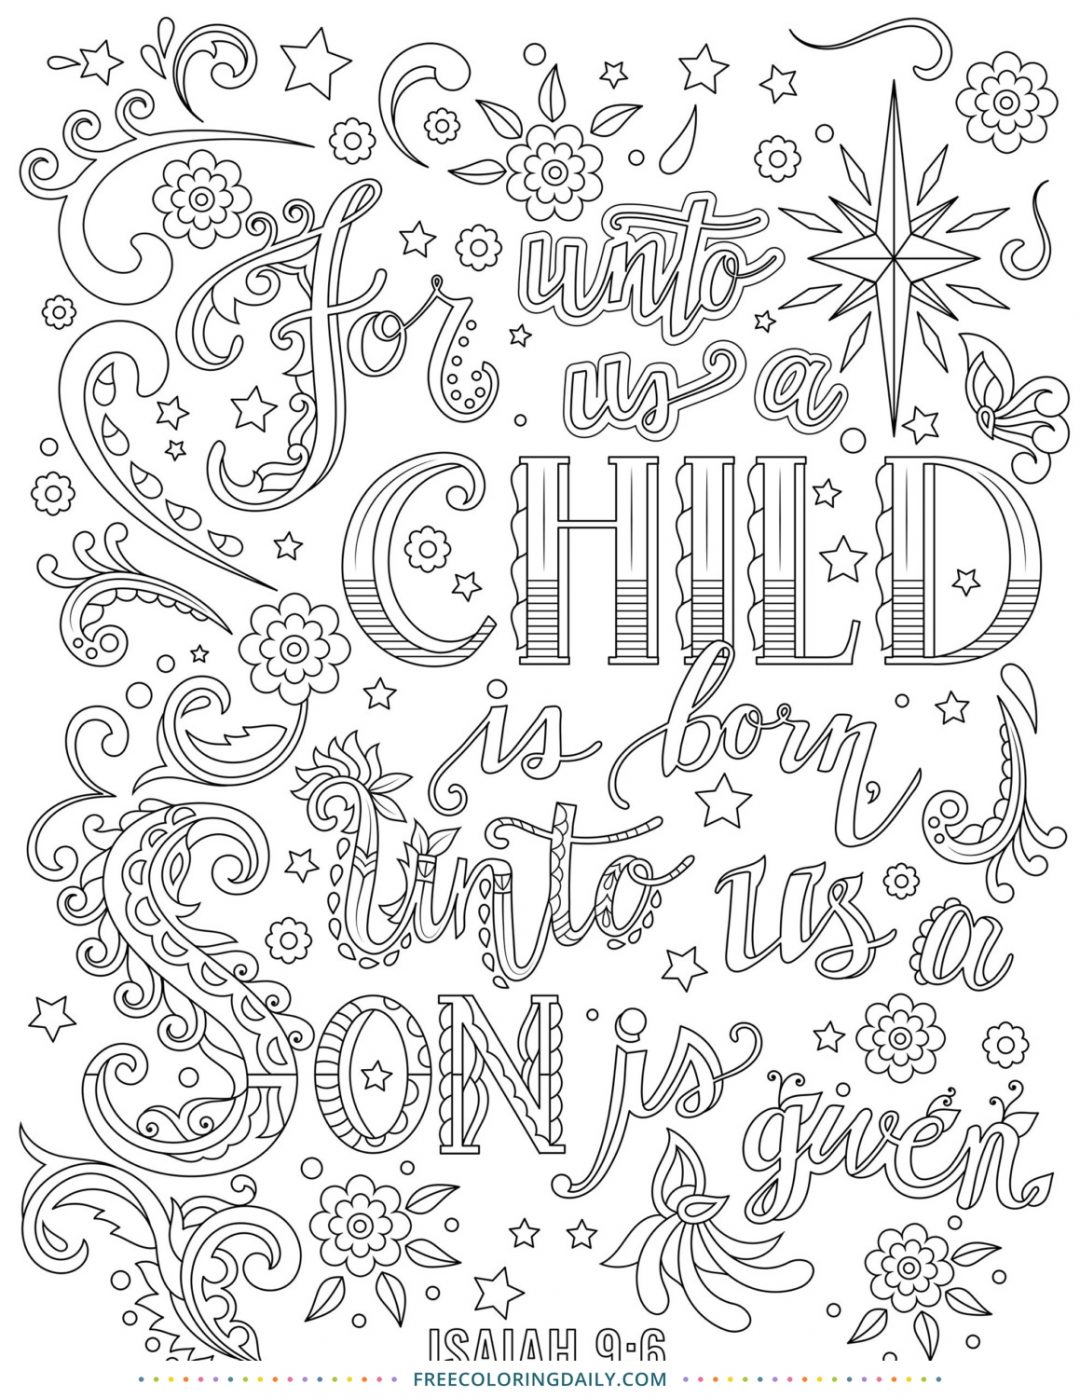 FREE “For Unto Us a Child is Born” Coloring Quote